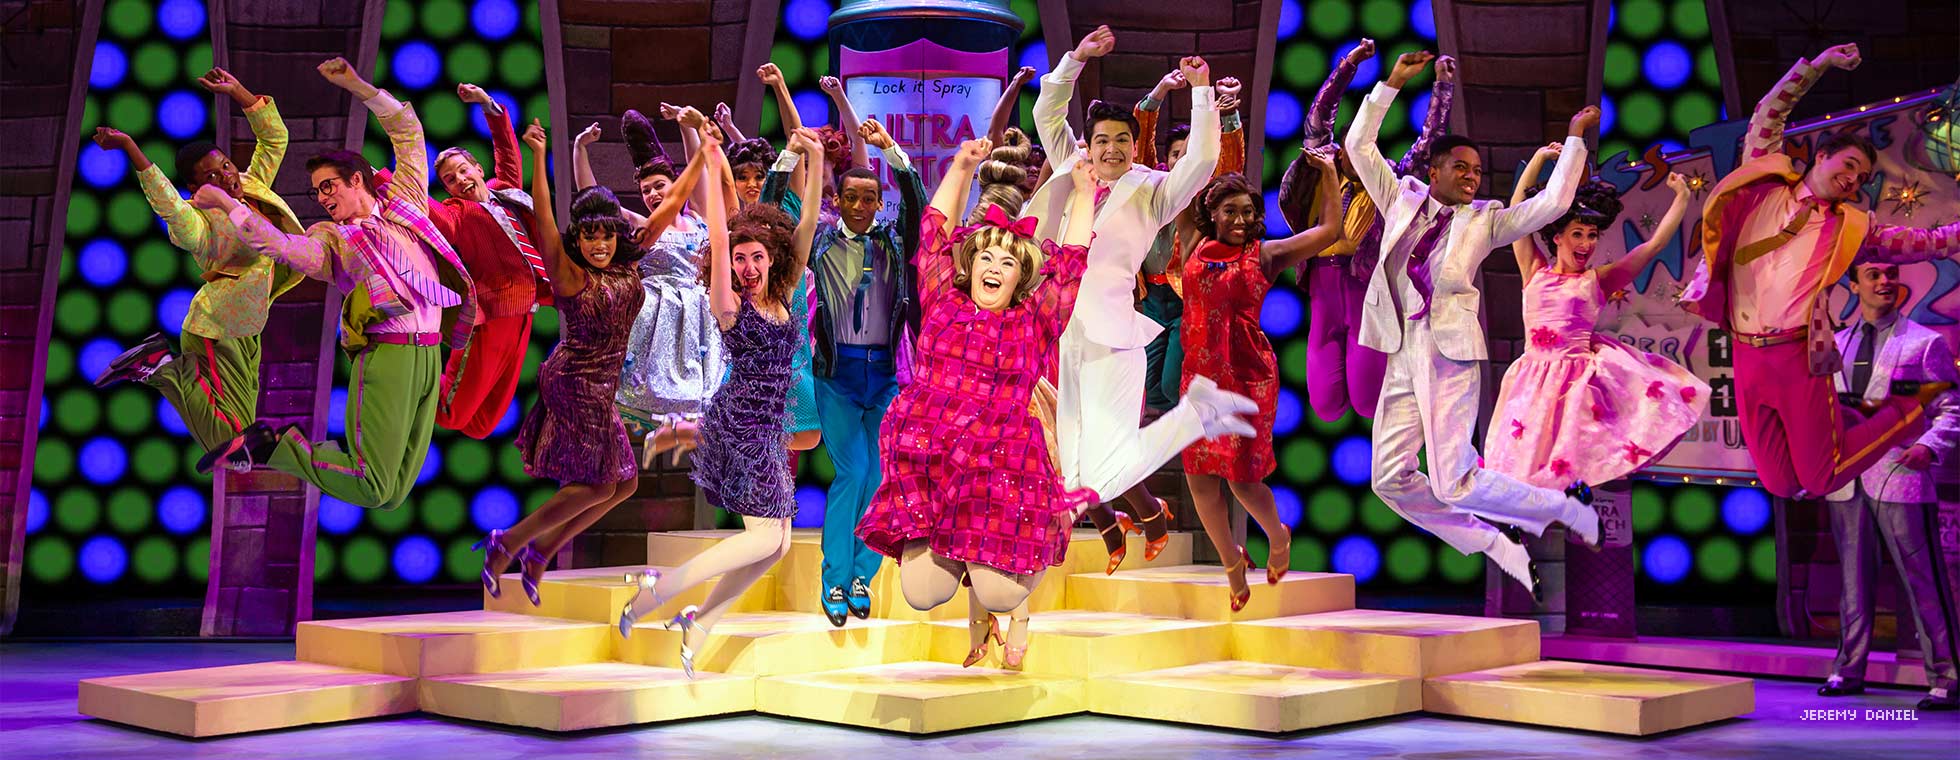 A girl wearing a beehive hairdo and a cast of dancers behind her jump up in unison.